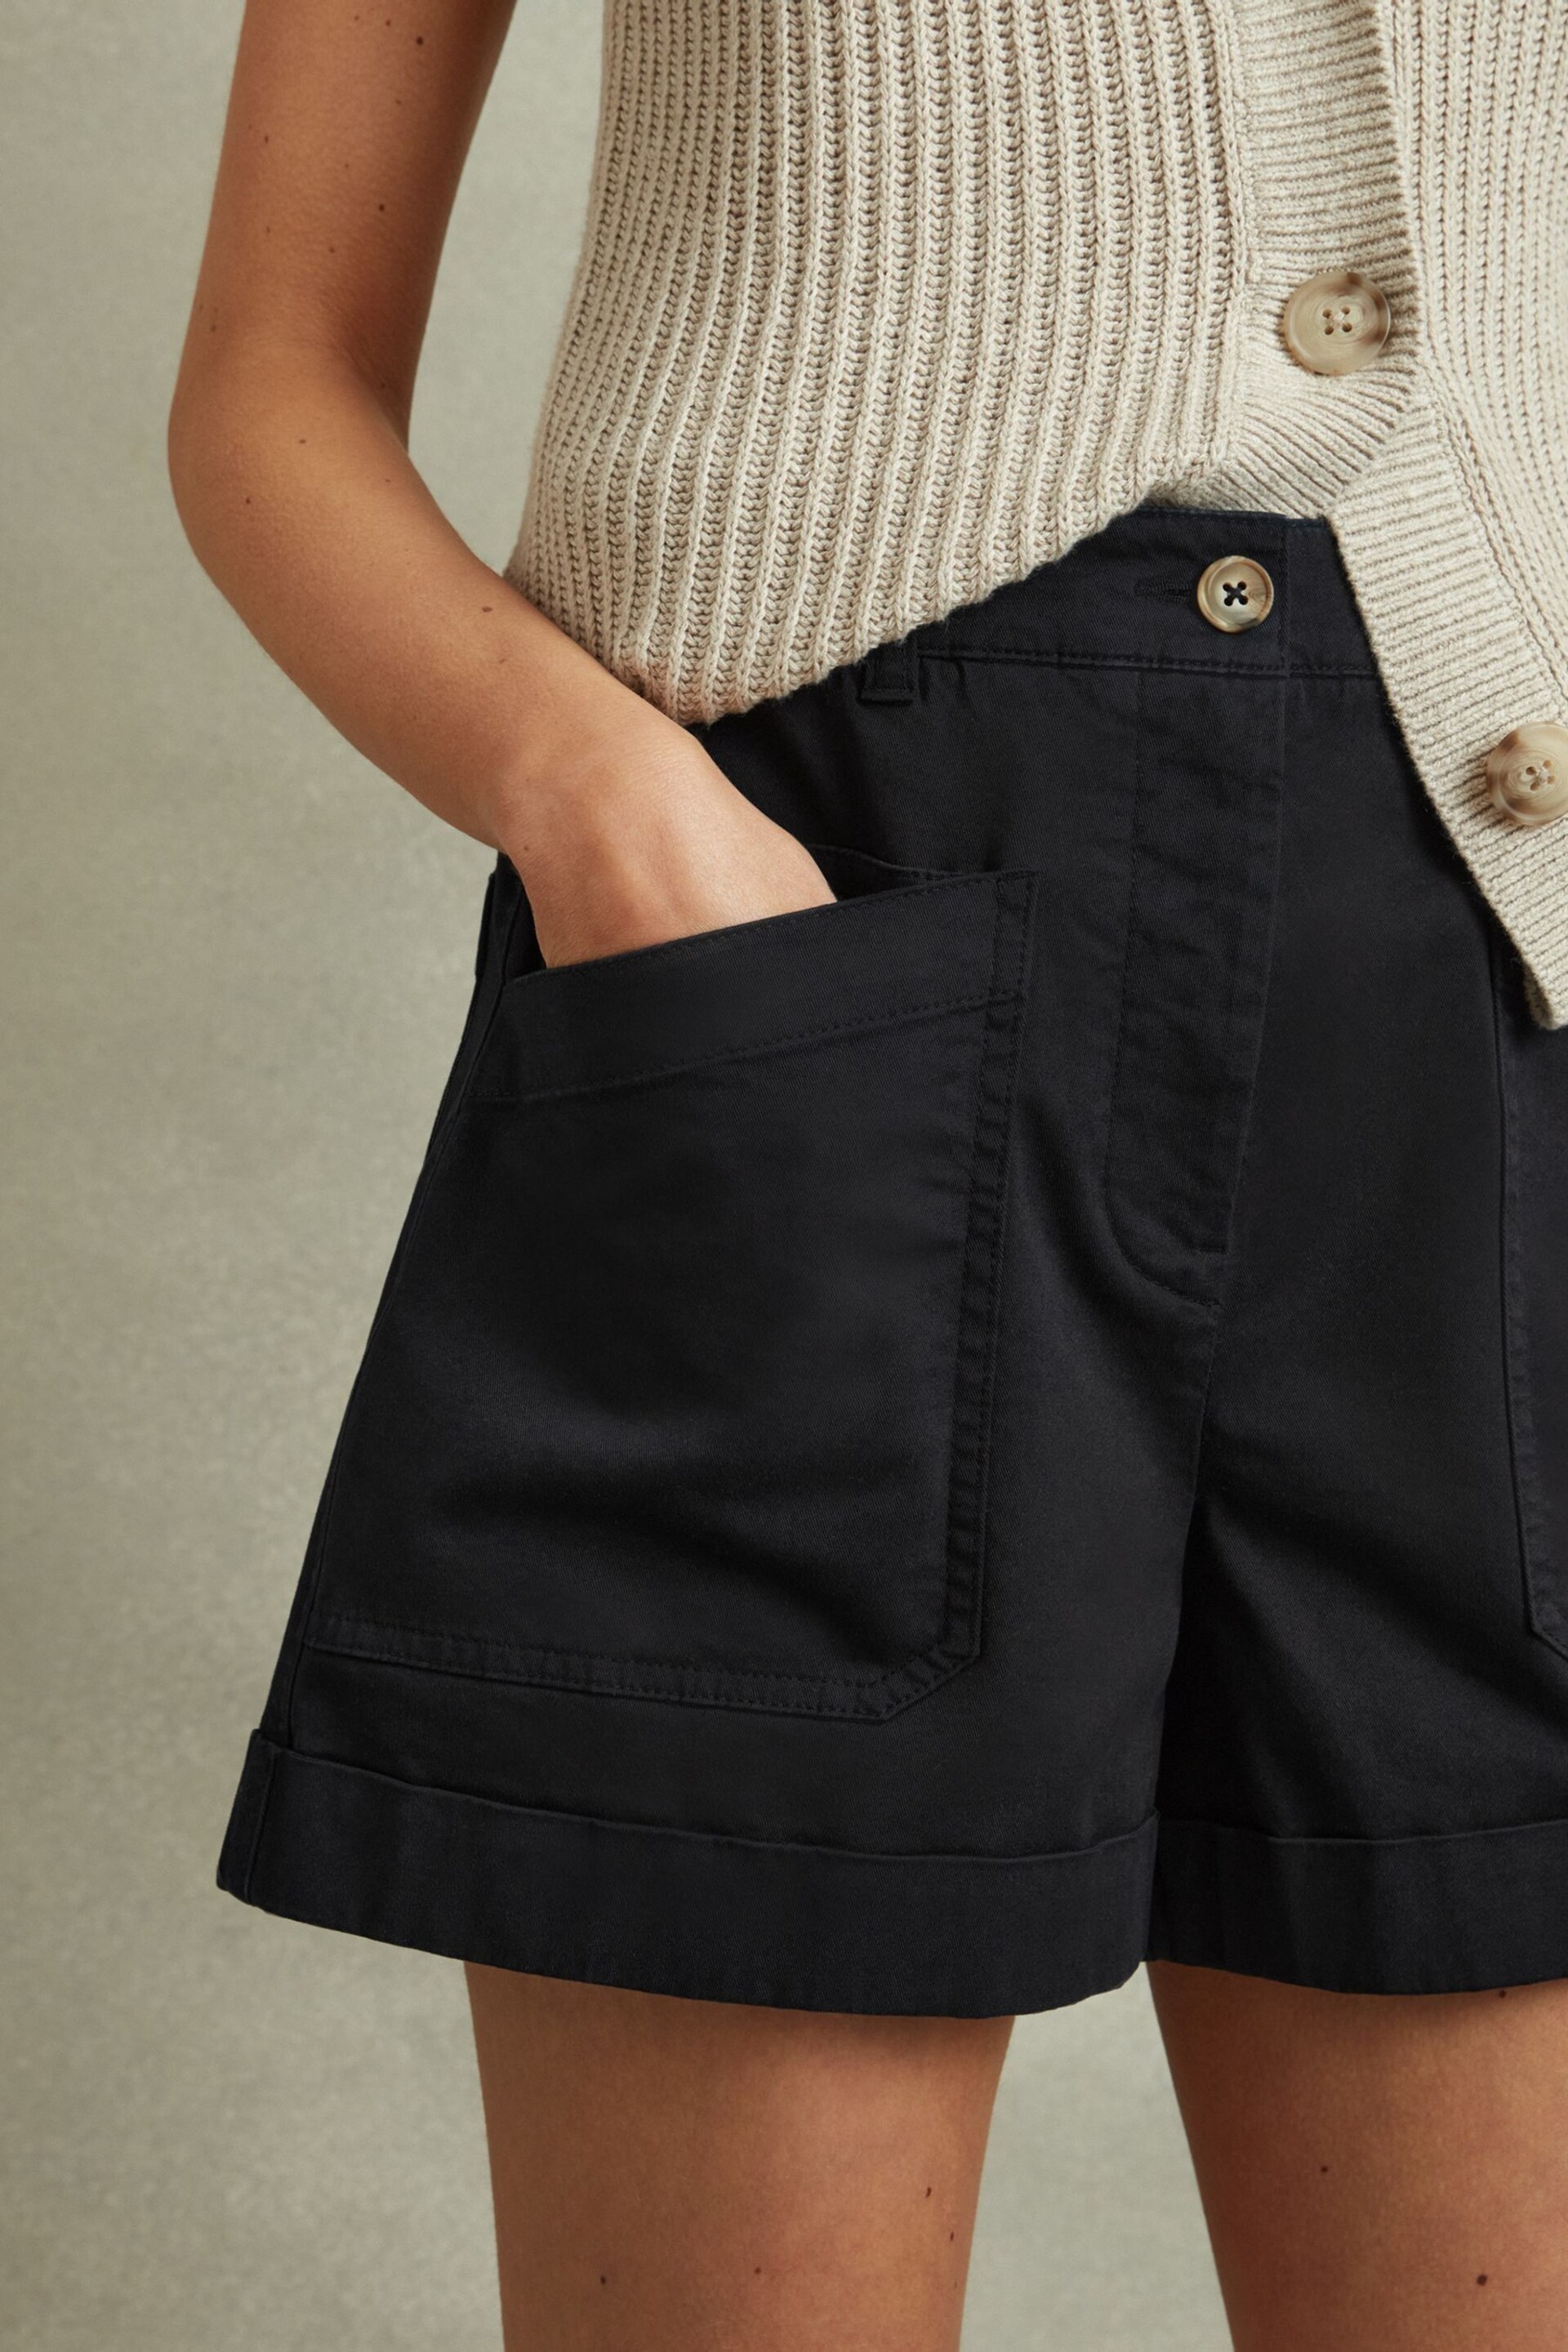 Reiss Navy Nova Cotton Blend Shorts with Turned-Up Hems - Image 3 of 5